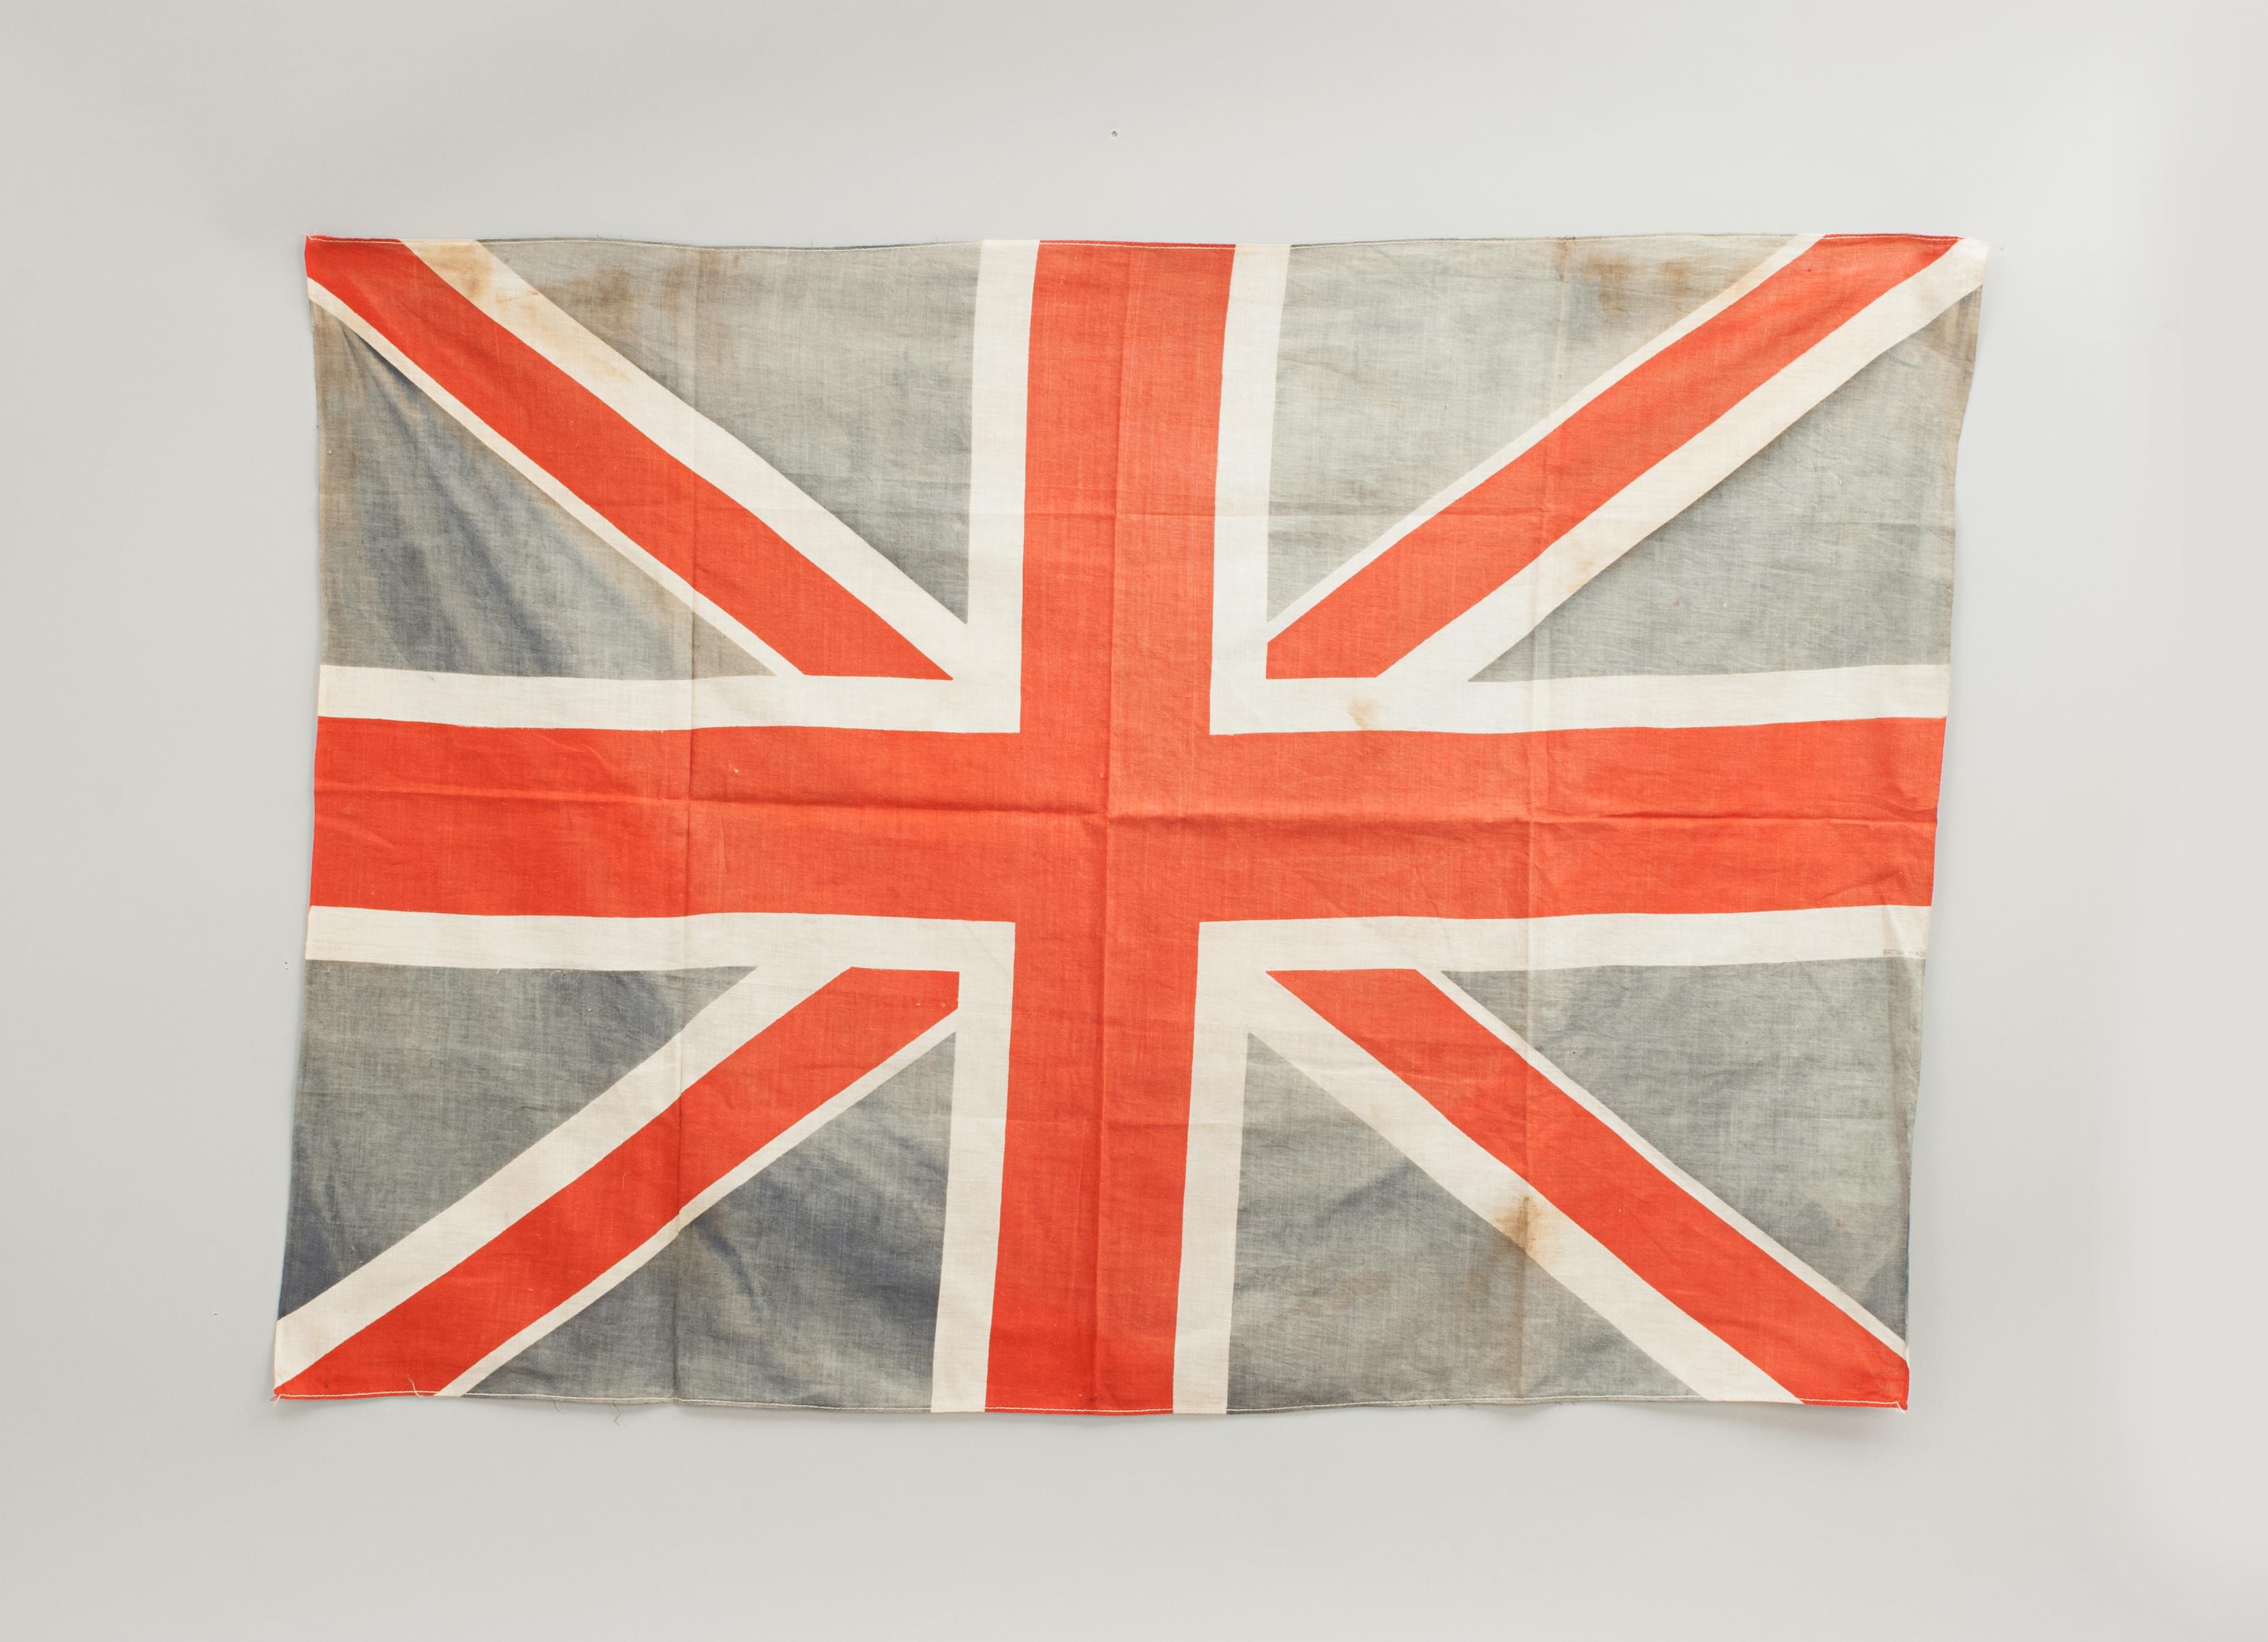 Victorian Union Jack.
A Union Jack flag made from lightweight linen cloth and stained red, white and blue. The colours have faded but it is still very attractive and is ideal as a display item.

The Union flag, most commonly called the Union